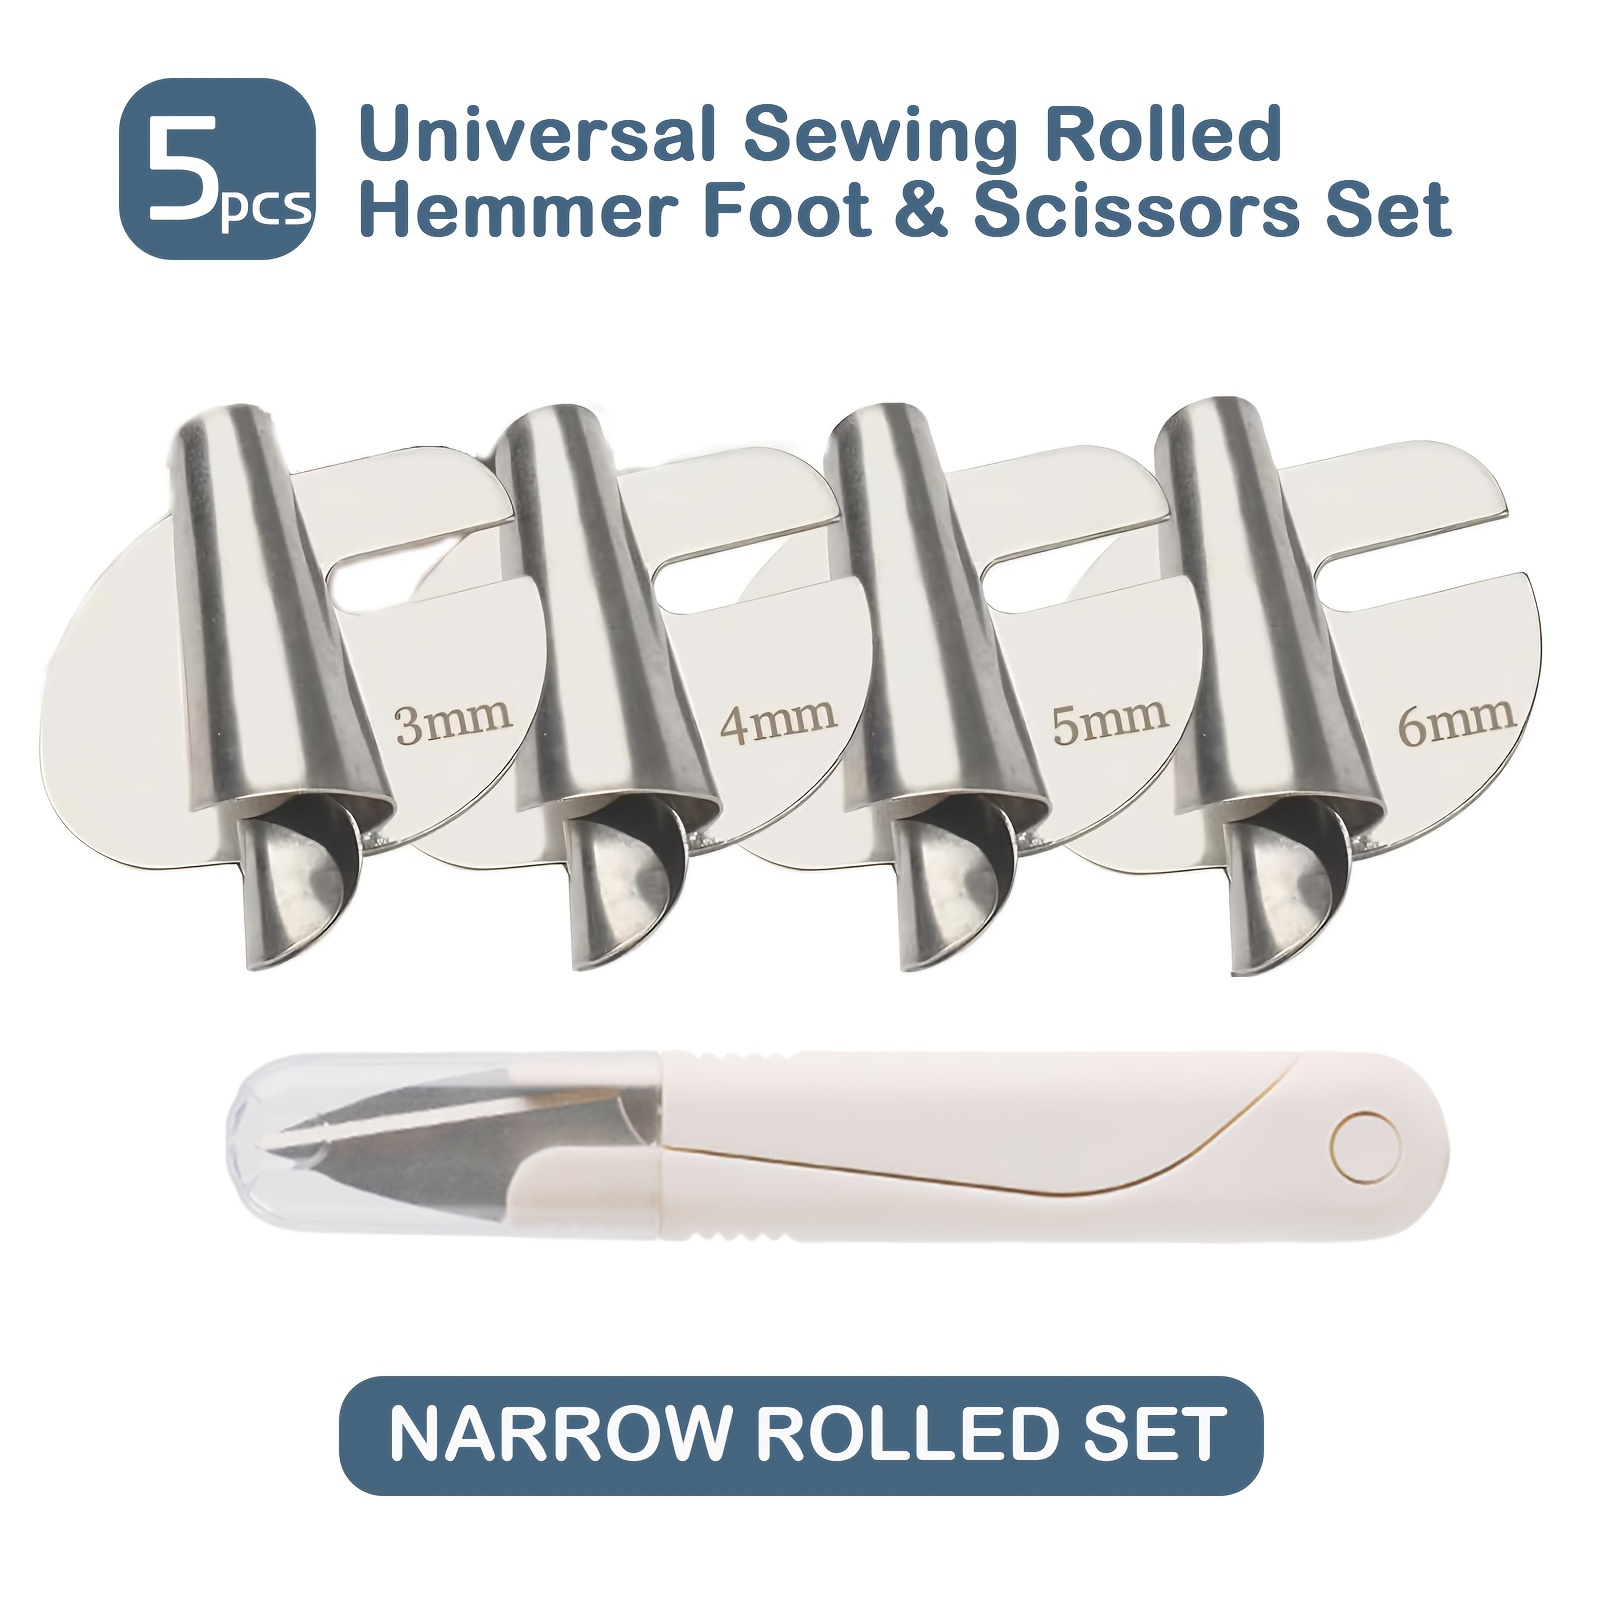  Sewing Rolled Hemmer Foot, Universal Sewing Rolled